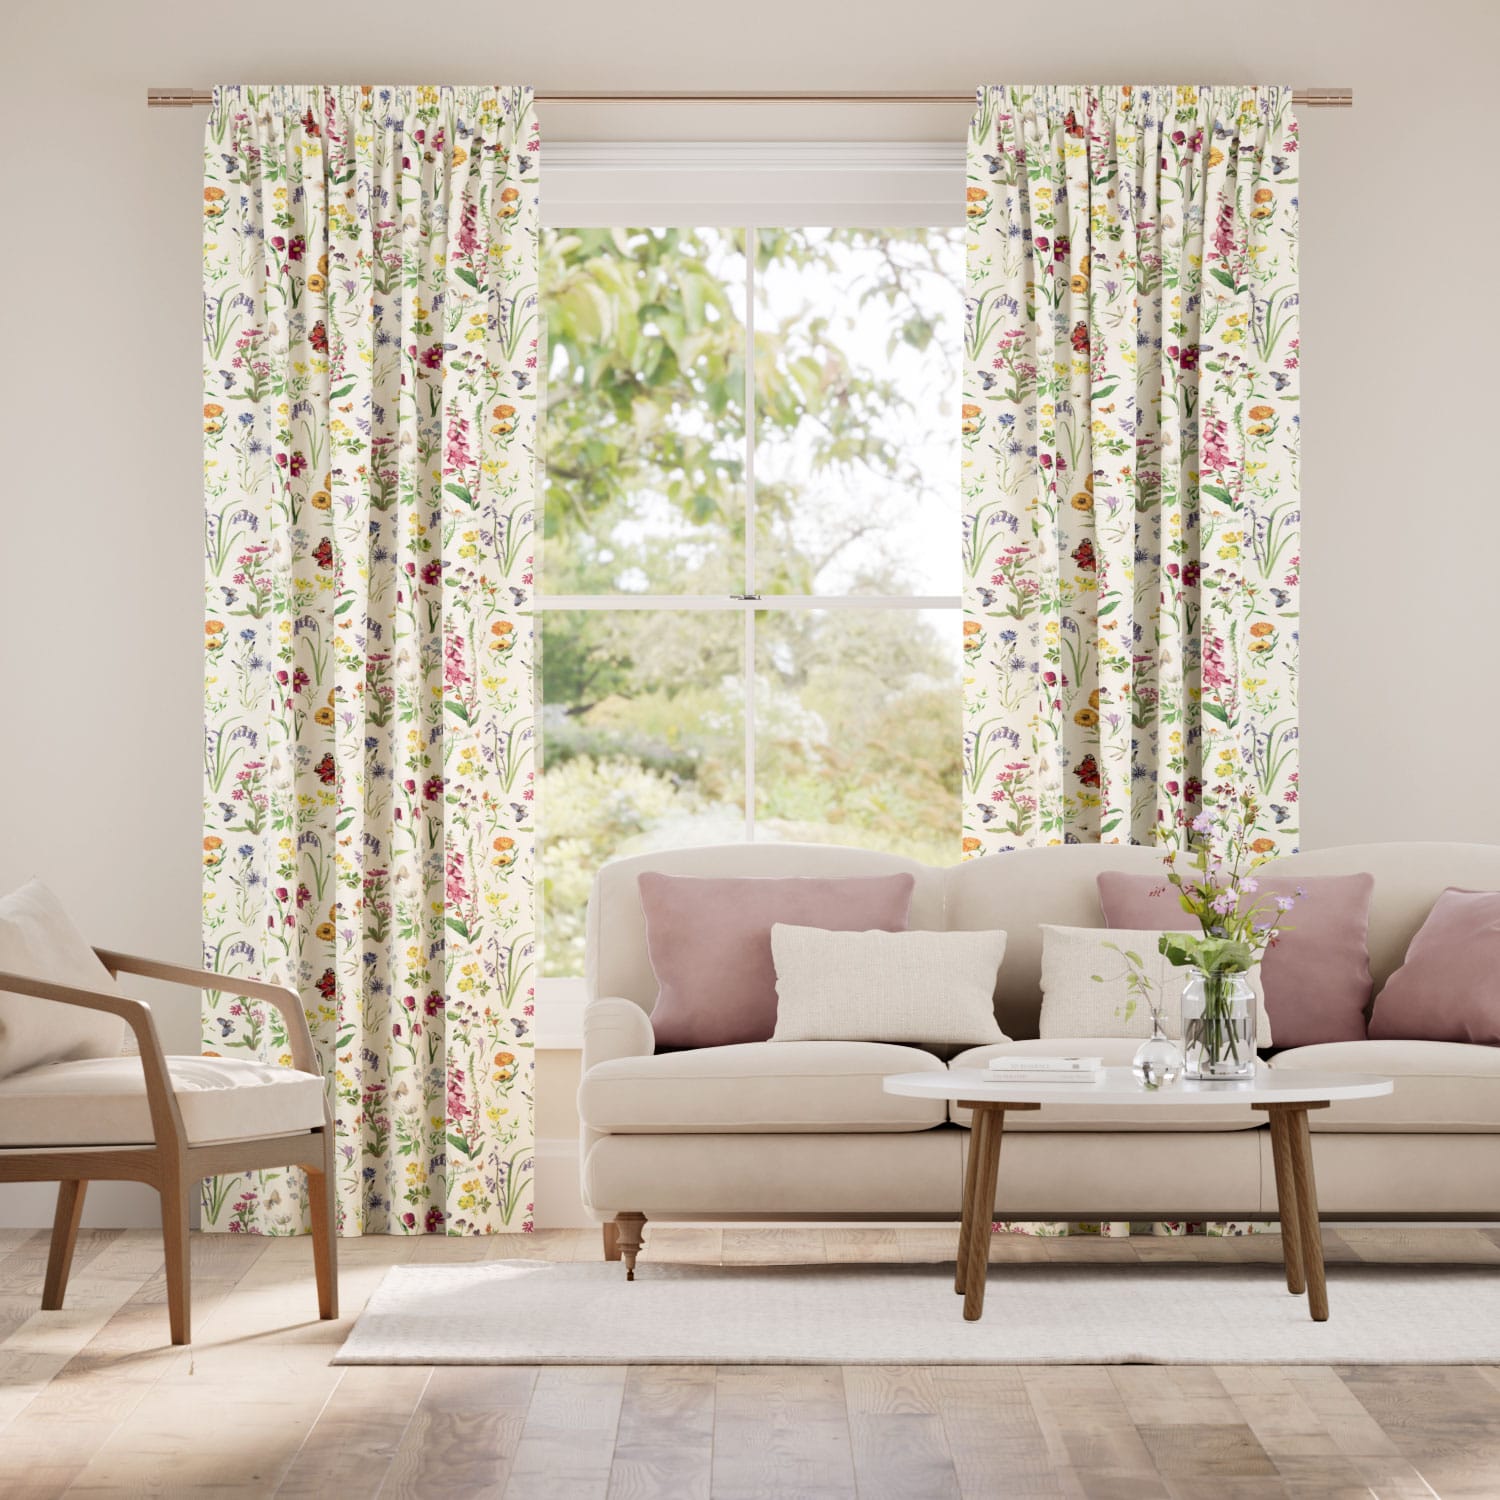 Wild Flowers Meadow Curtains